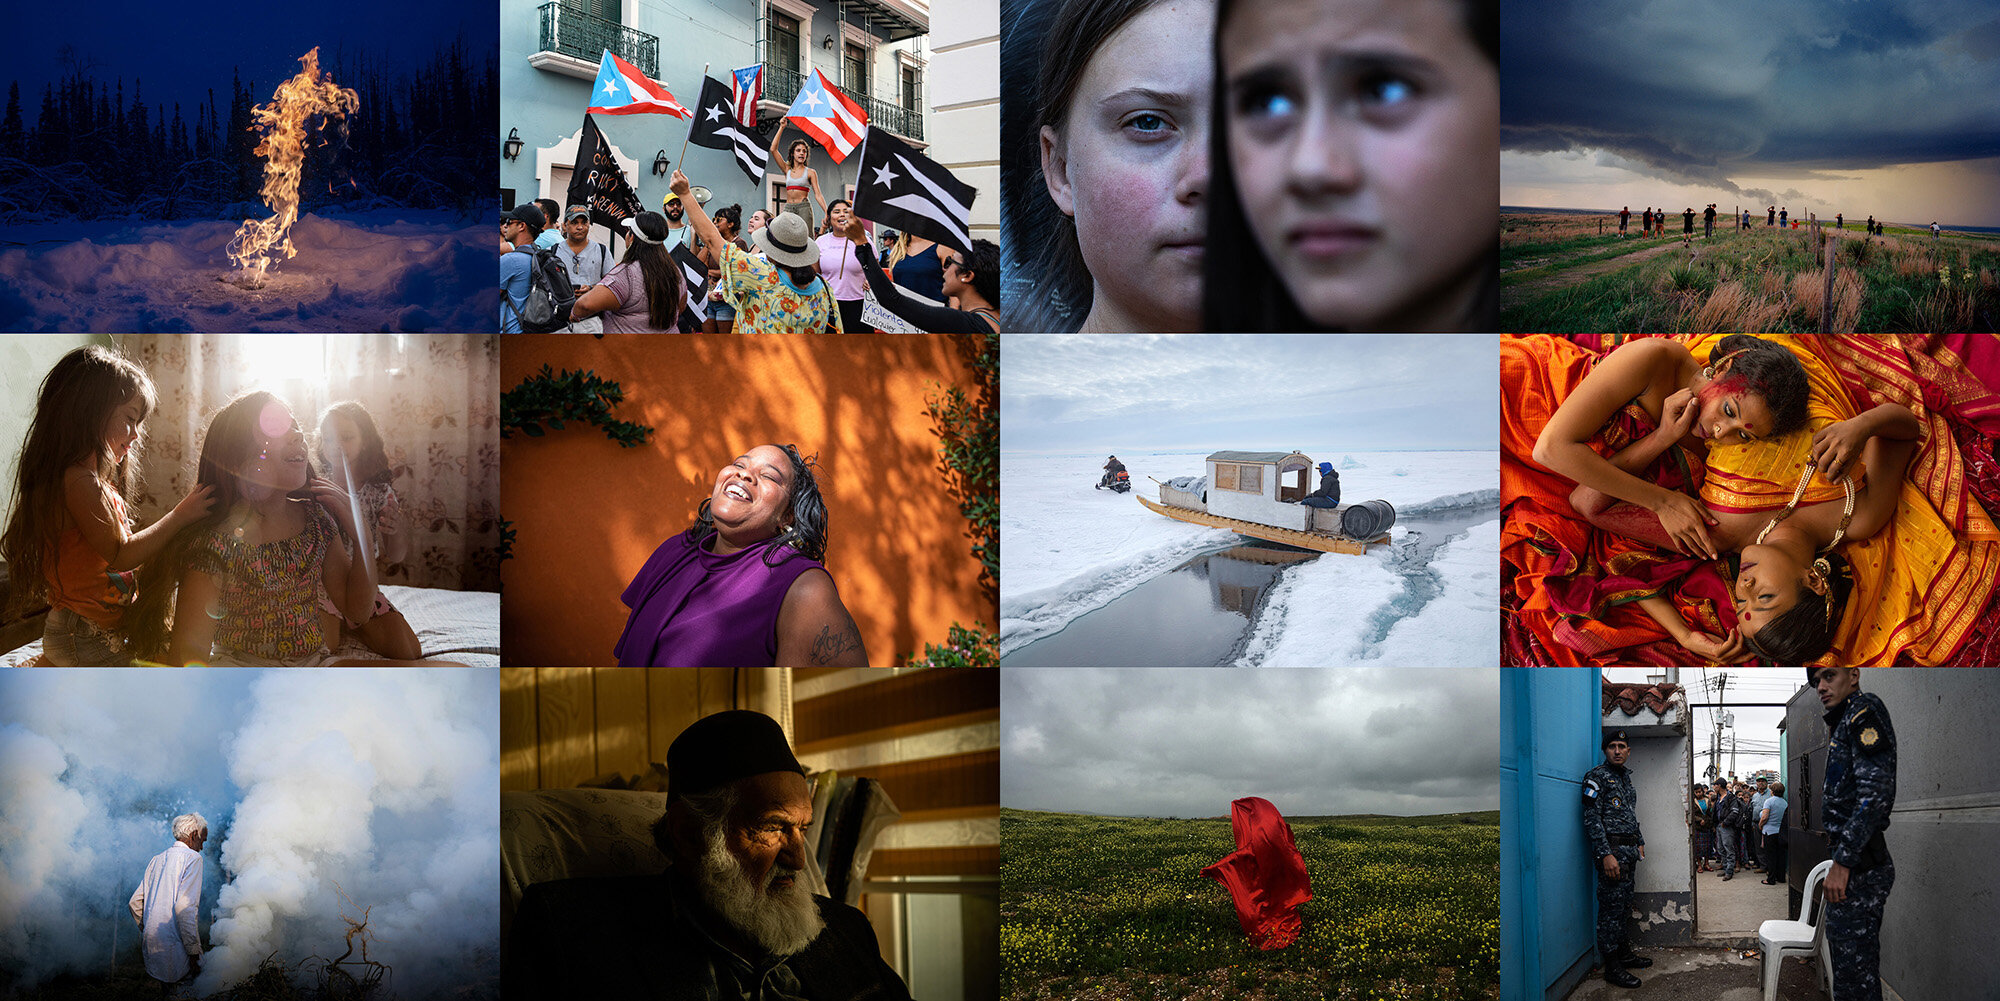 Women Photograph 2019 Year in Pictures — Women Photograph